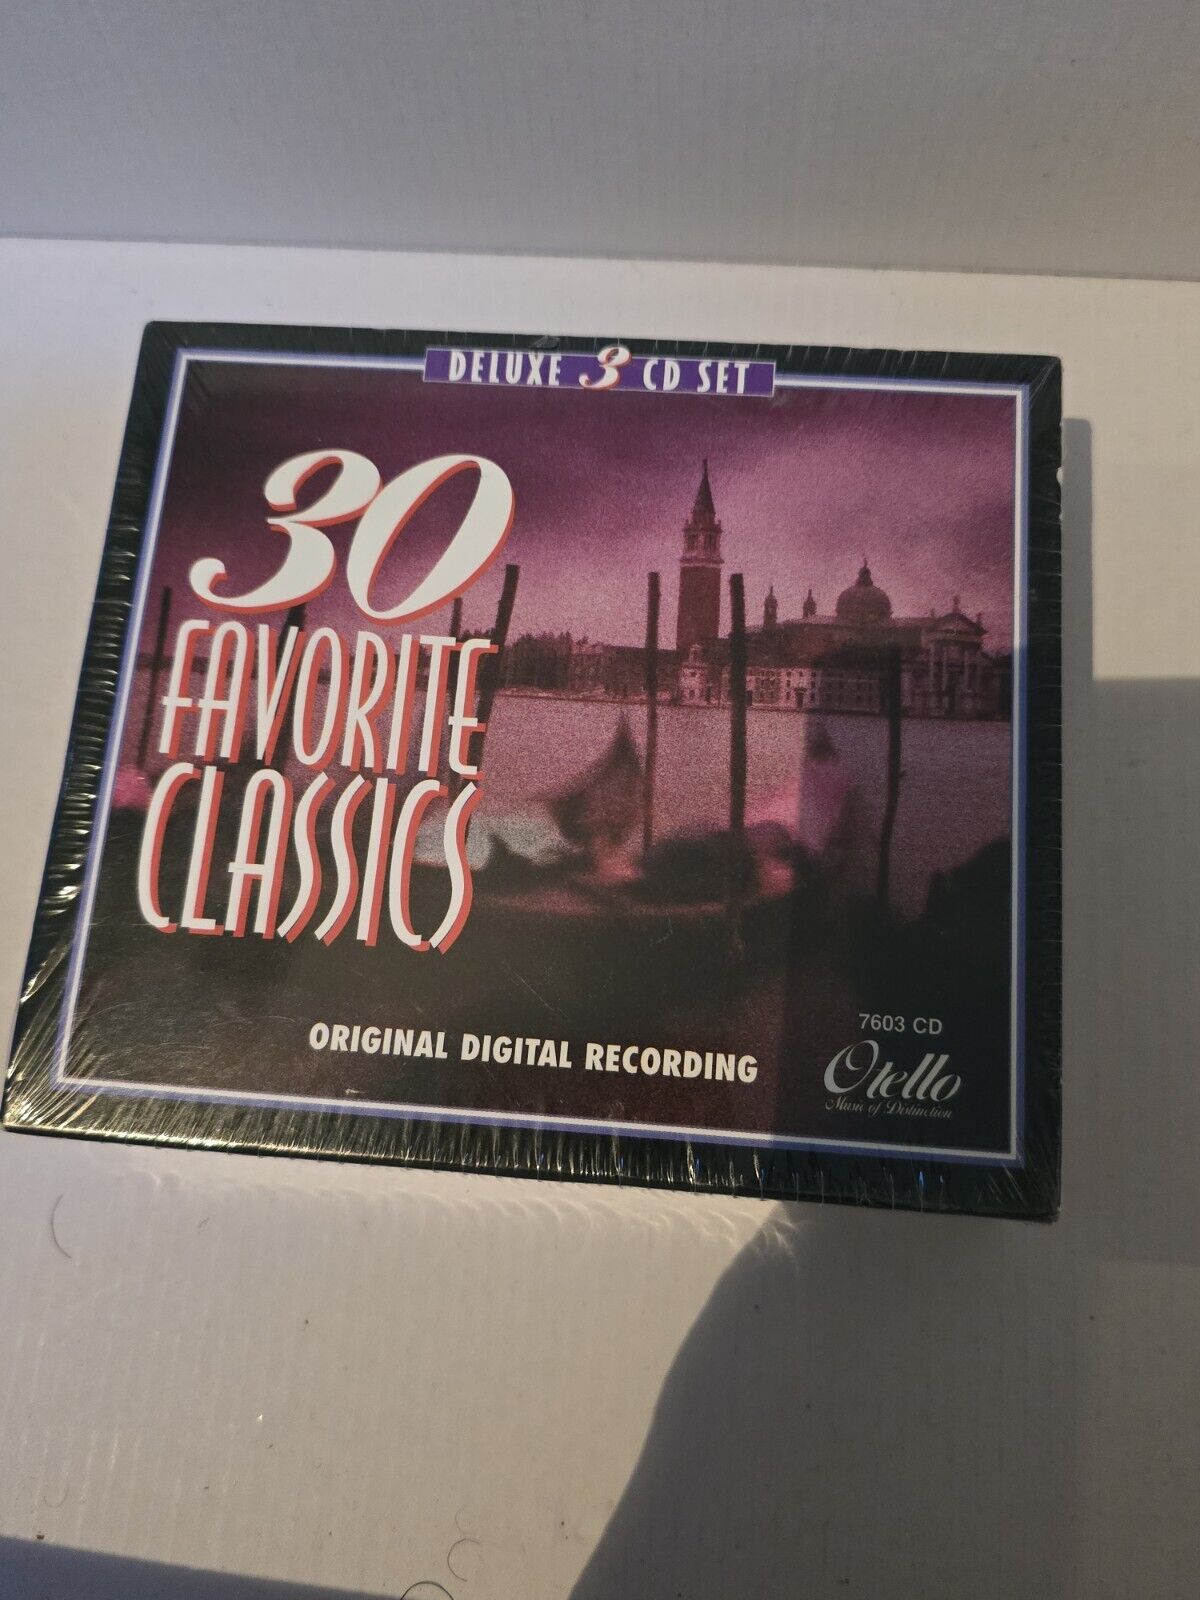 30 Favorite Classics / Various by Various Artists (CD, 1996) - Music CD